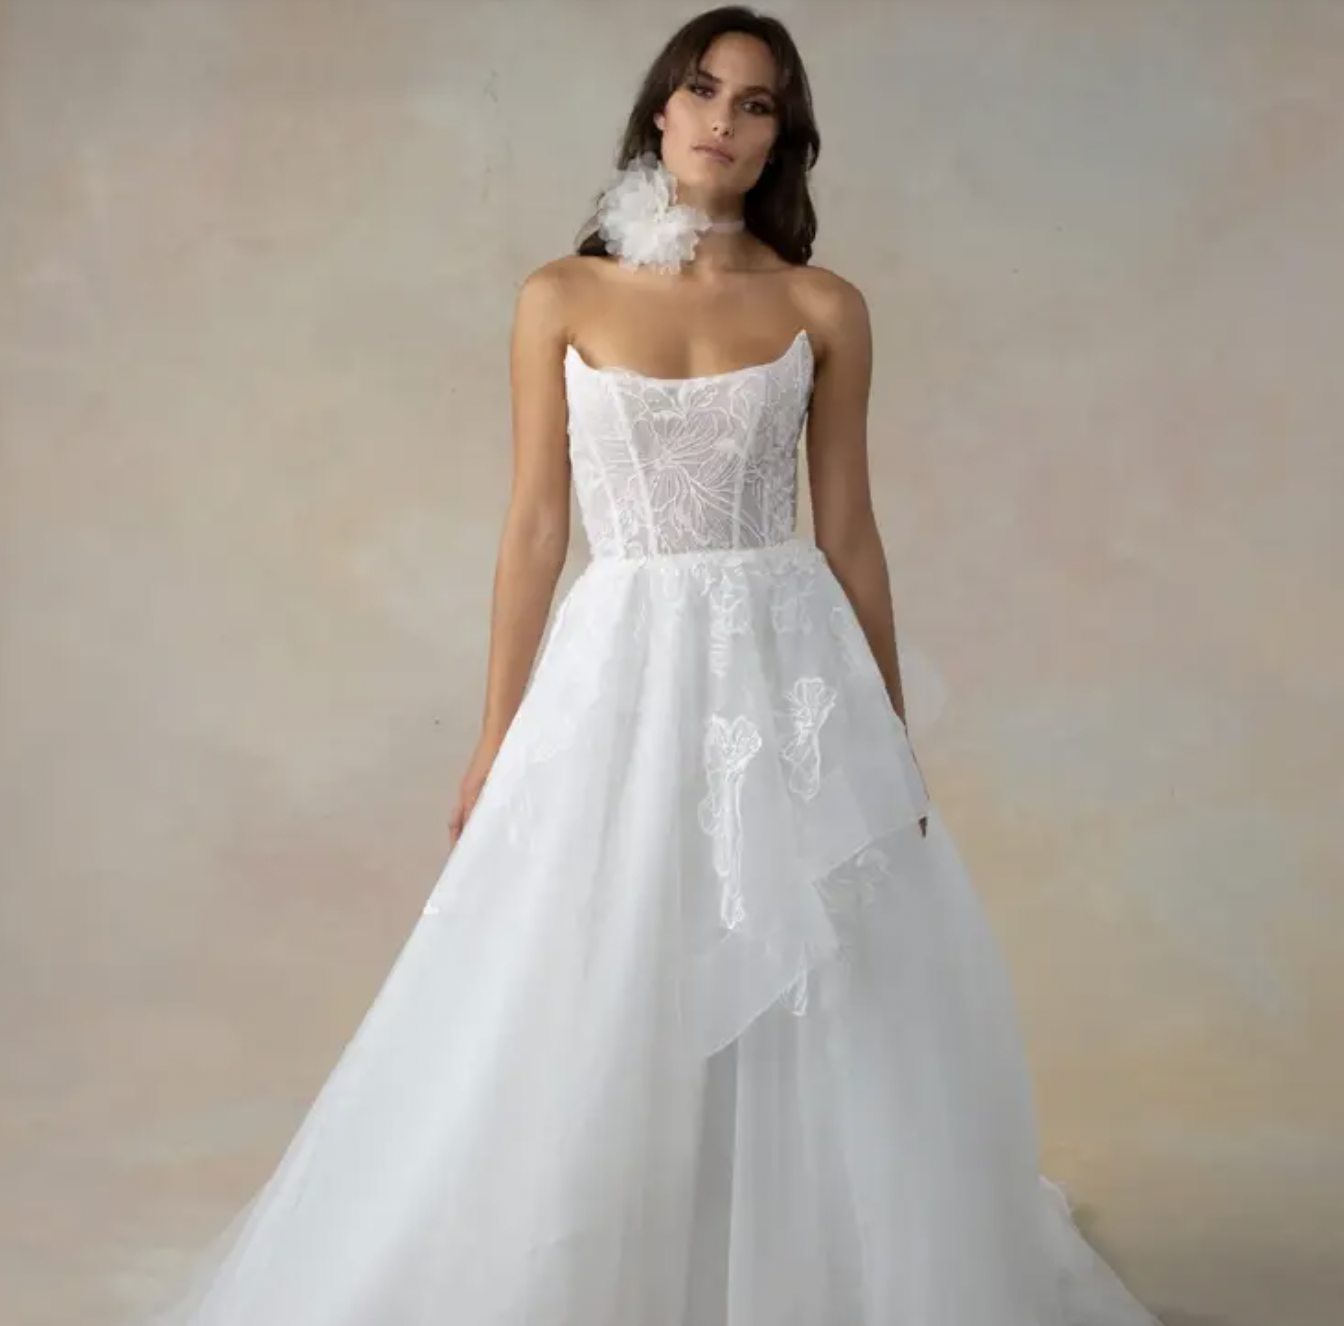 Reasons To Get A Second Reception Dress Image